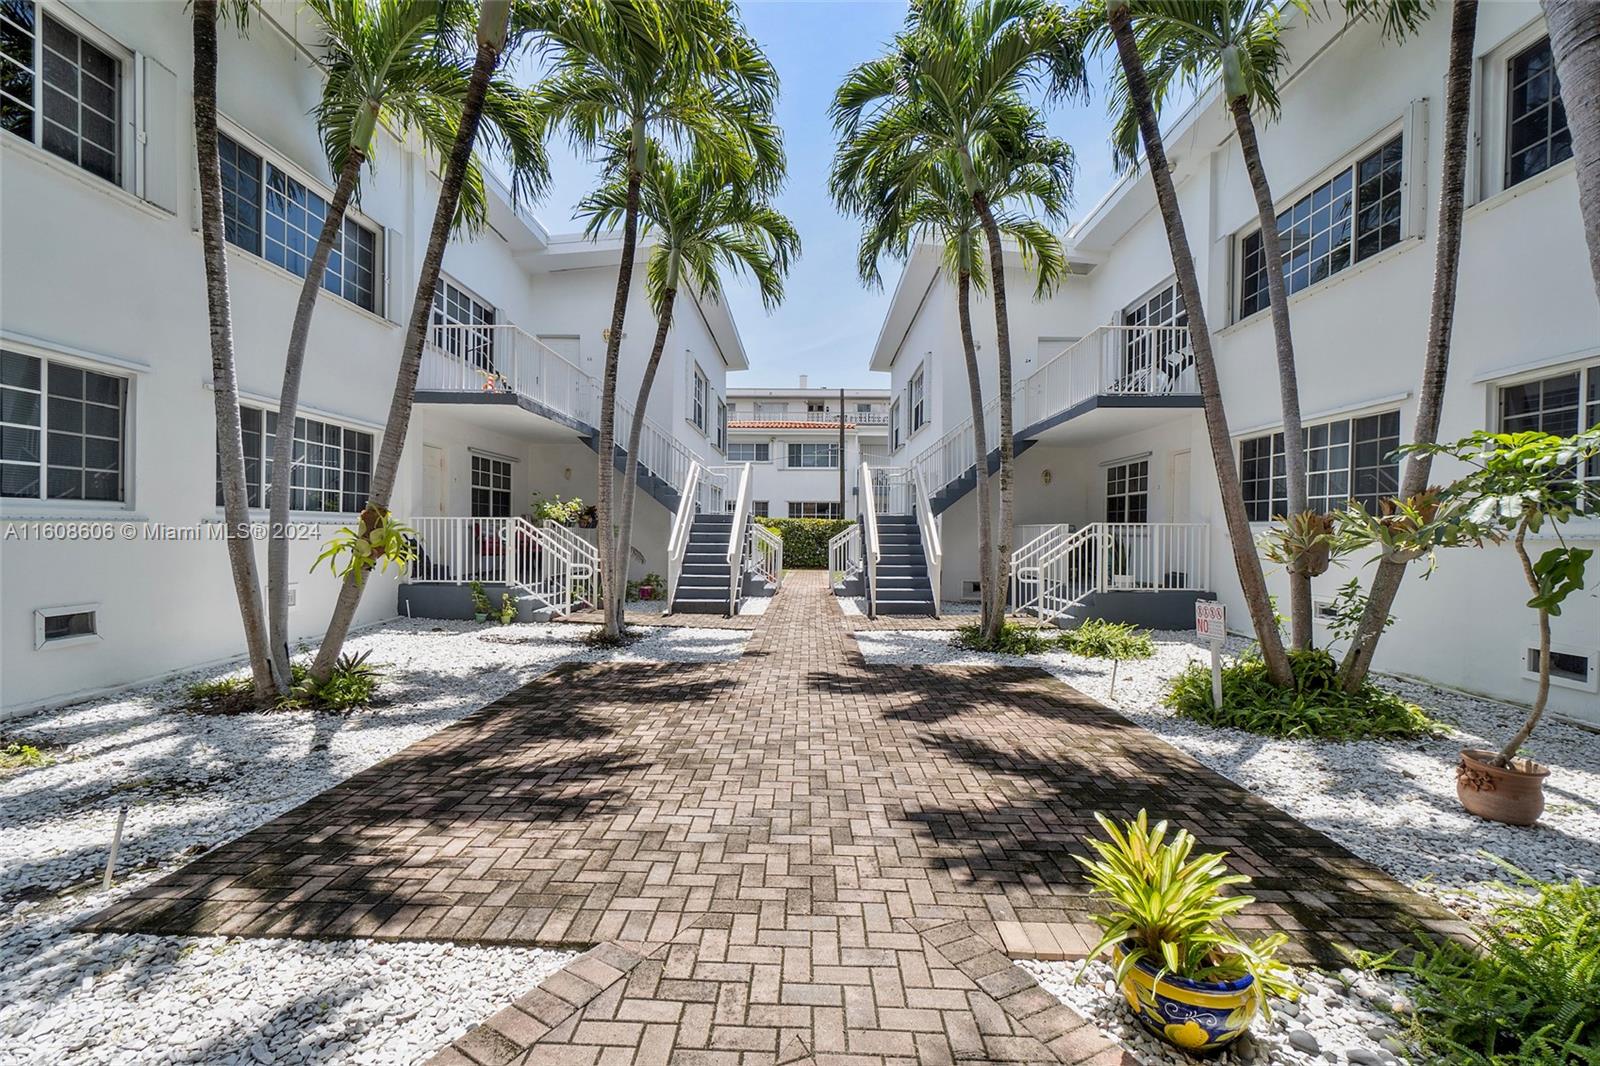 Rarely available 3 bedroom 2 bathroom condo in beautiful Bay Harbor Islands! This one of a kind unit offers 1314sqft of interior living space & is easily accessible on the ground floor-no climbing stairs! This corner unit floods with ample natural light. Amazing location 10 minute walk to the beach & Bal Harbor Shops, 5 minute walk to Ruth-K Broad (10/10 school), directly behind police station. 1 minute walk to dog park & playground, 2 minute walk to Pura Vida, other shops & an easy walk to many houses of worship.
Enjoy the sun on your large private patio. Abundant closet space (6 oversized closets). Oversized master bedroom. Full sized LG front loader washer & dryer in unit. Ceiling fans. Hardwood floors. Central AC. 1 designated car space & 1 community space. Cable TV & WiFi included.